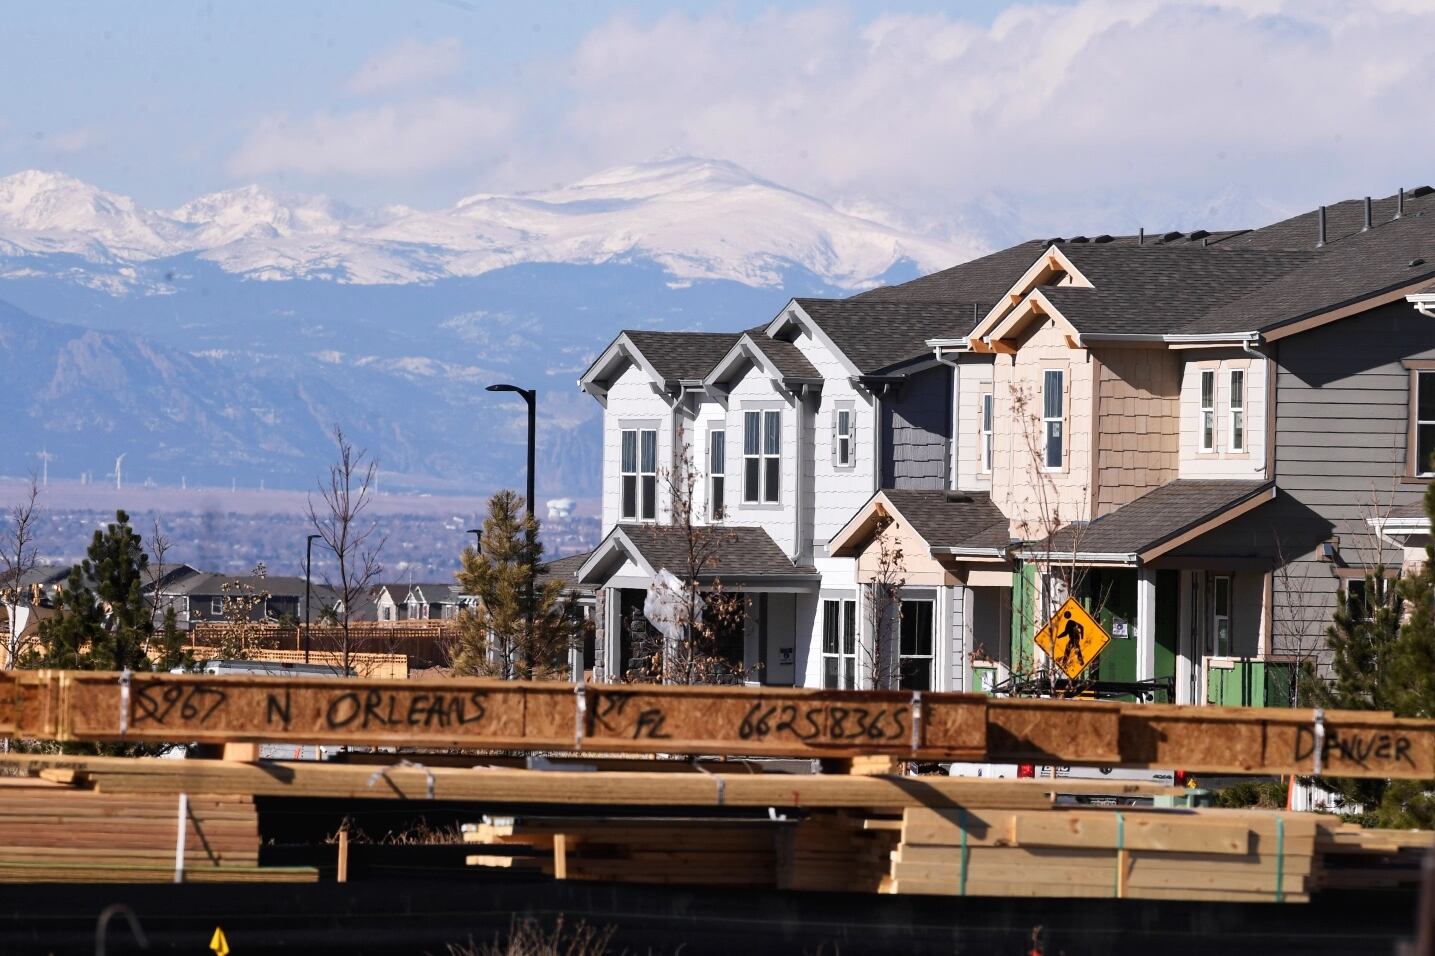 Homes in a newer subdivision stand in a line on the right side of the frame. On the left, the snow-capped Rocky Mountains can be seen in the distance.